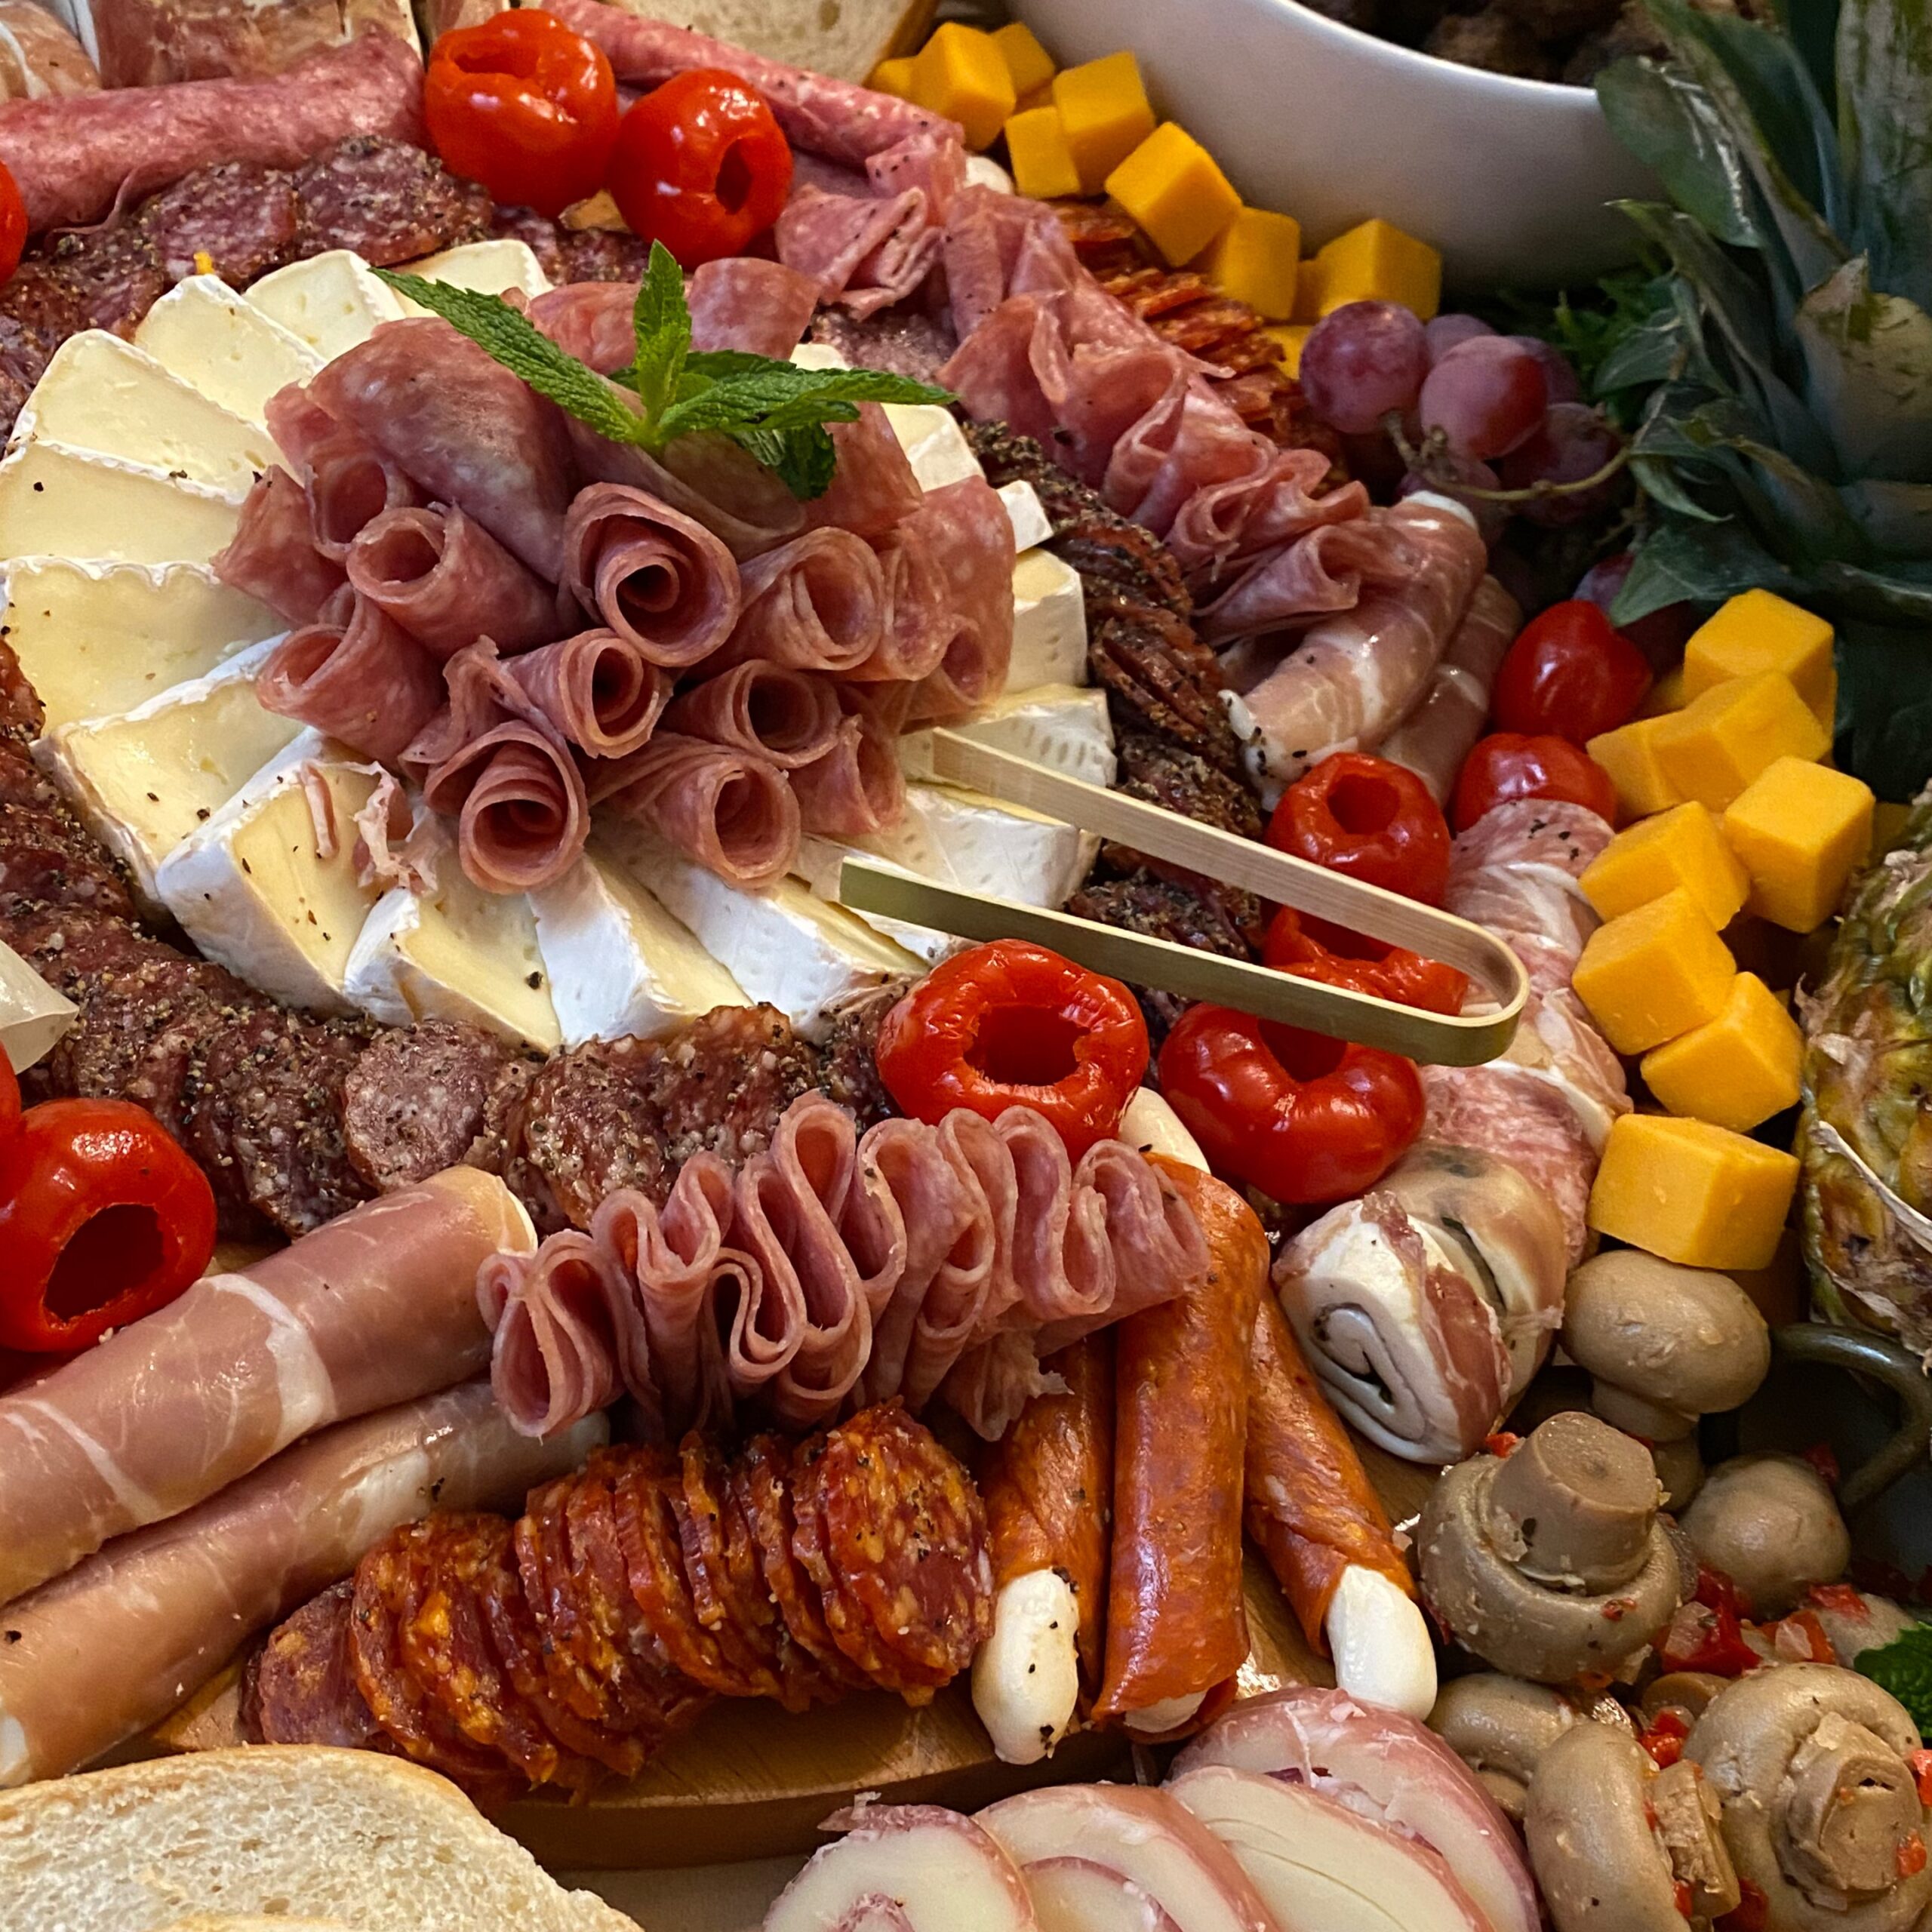 Make your own charcuterie board for beginners 09/07/22